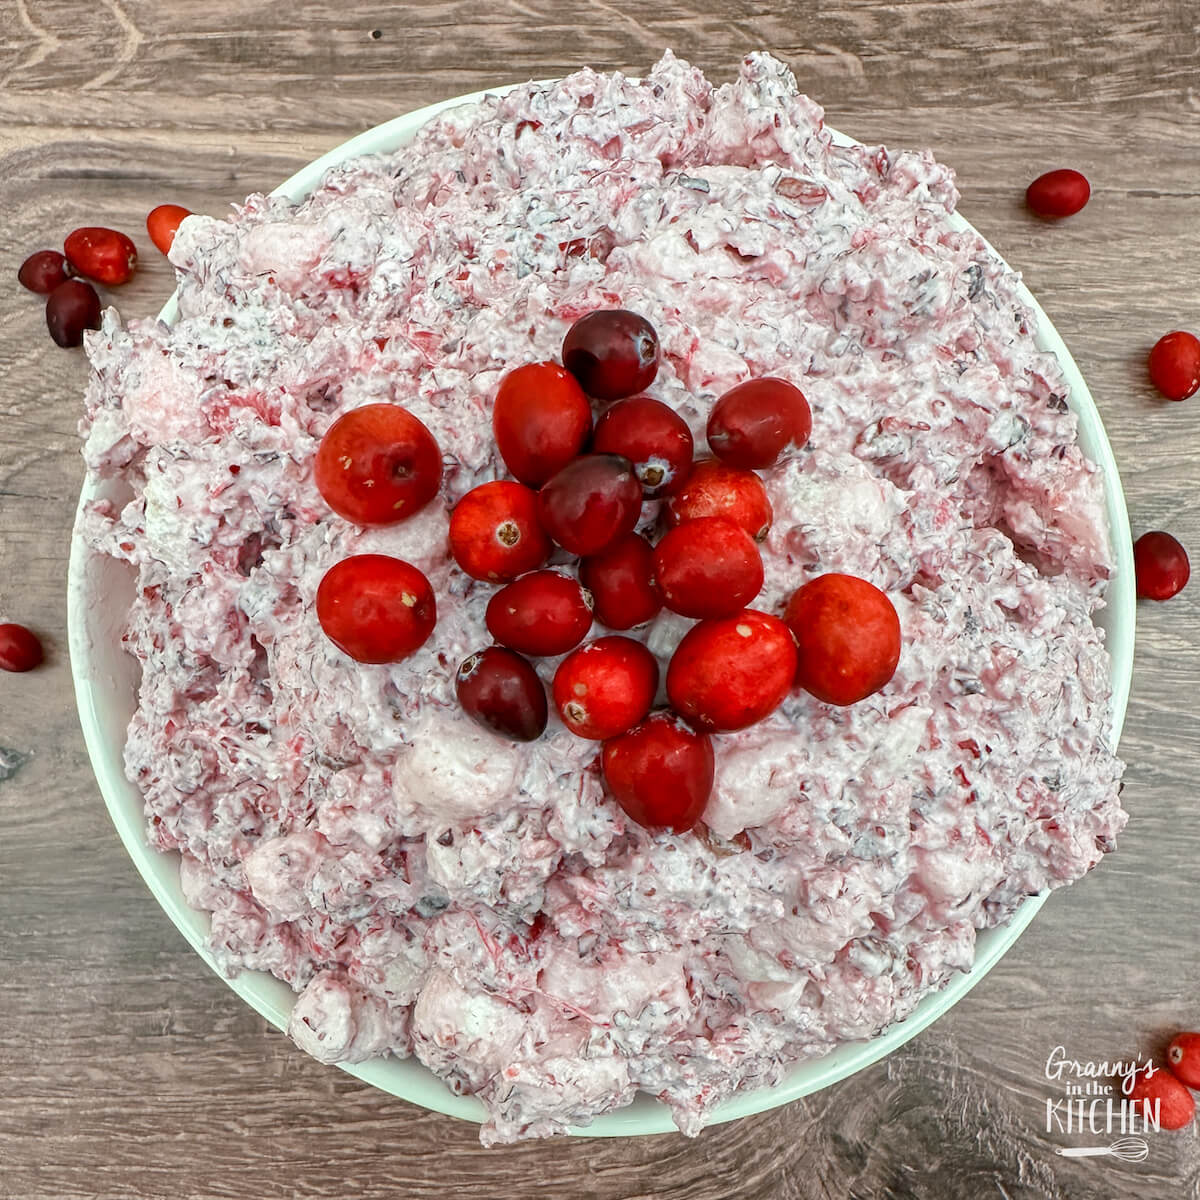 bowl of cranberry fluff on wooden background.